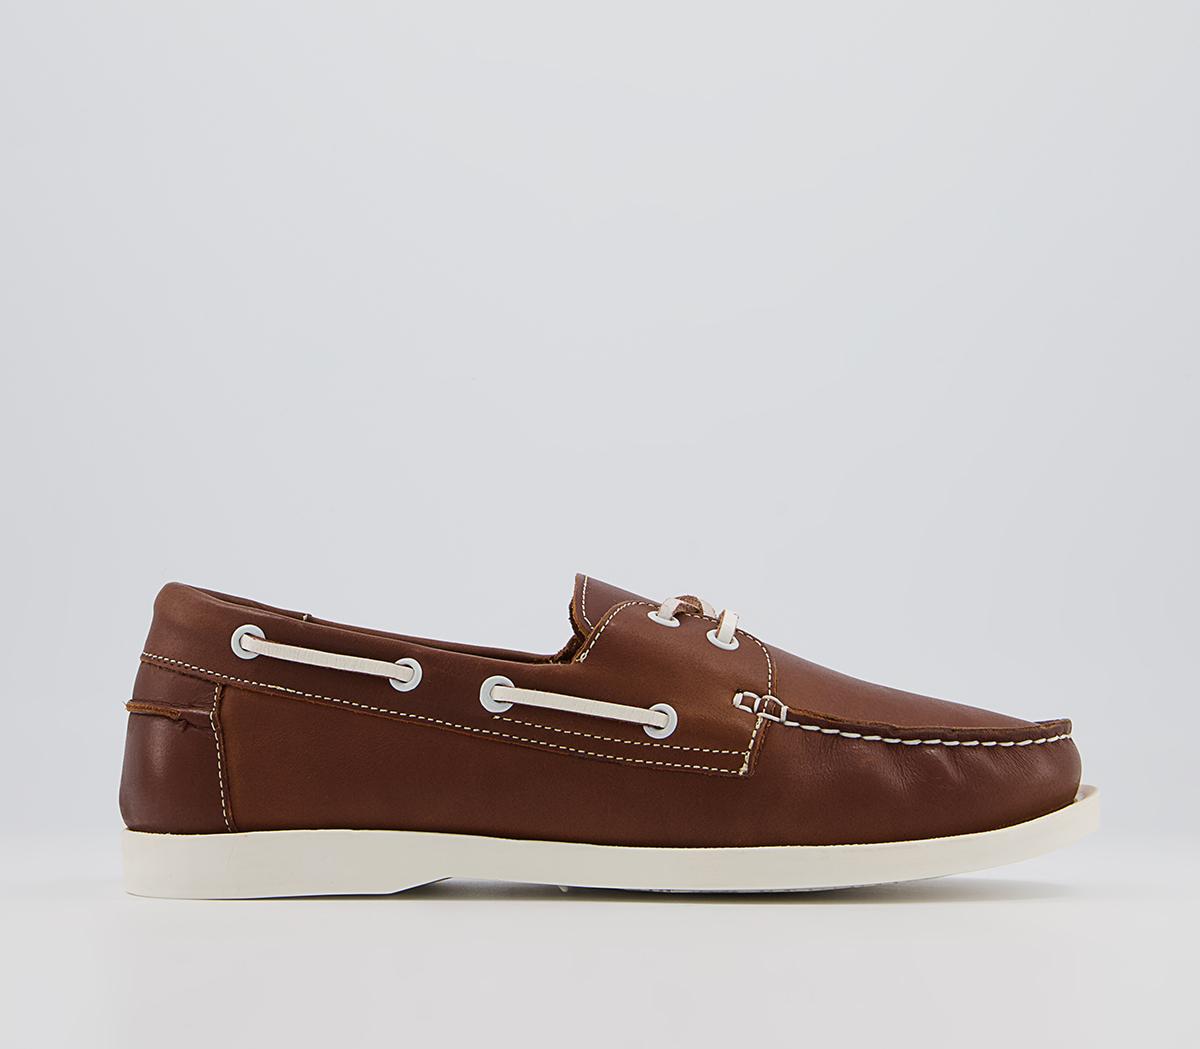 OfficeCabin Boat ShoesBrown Leather